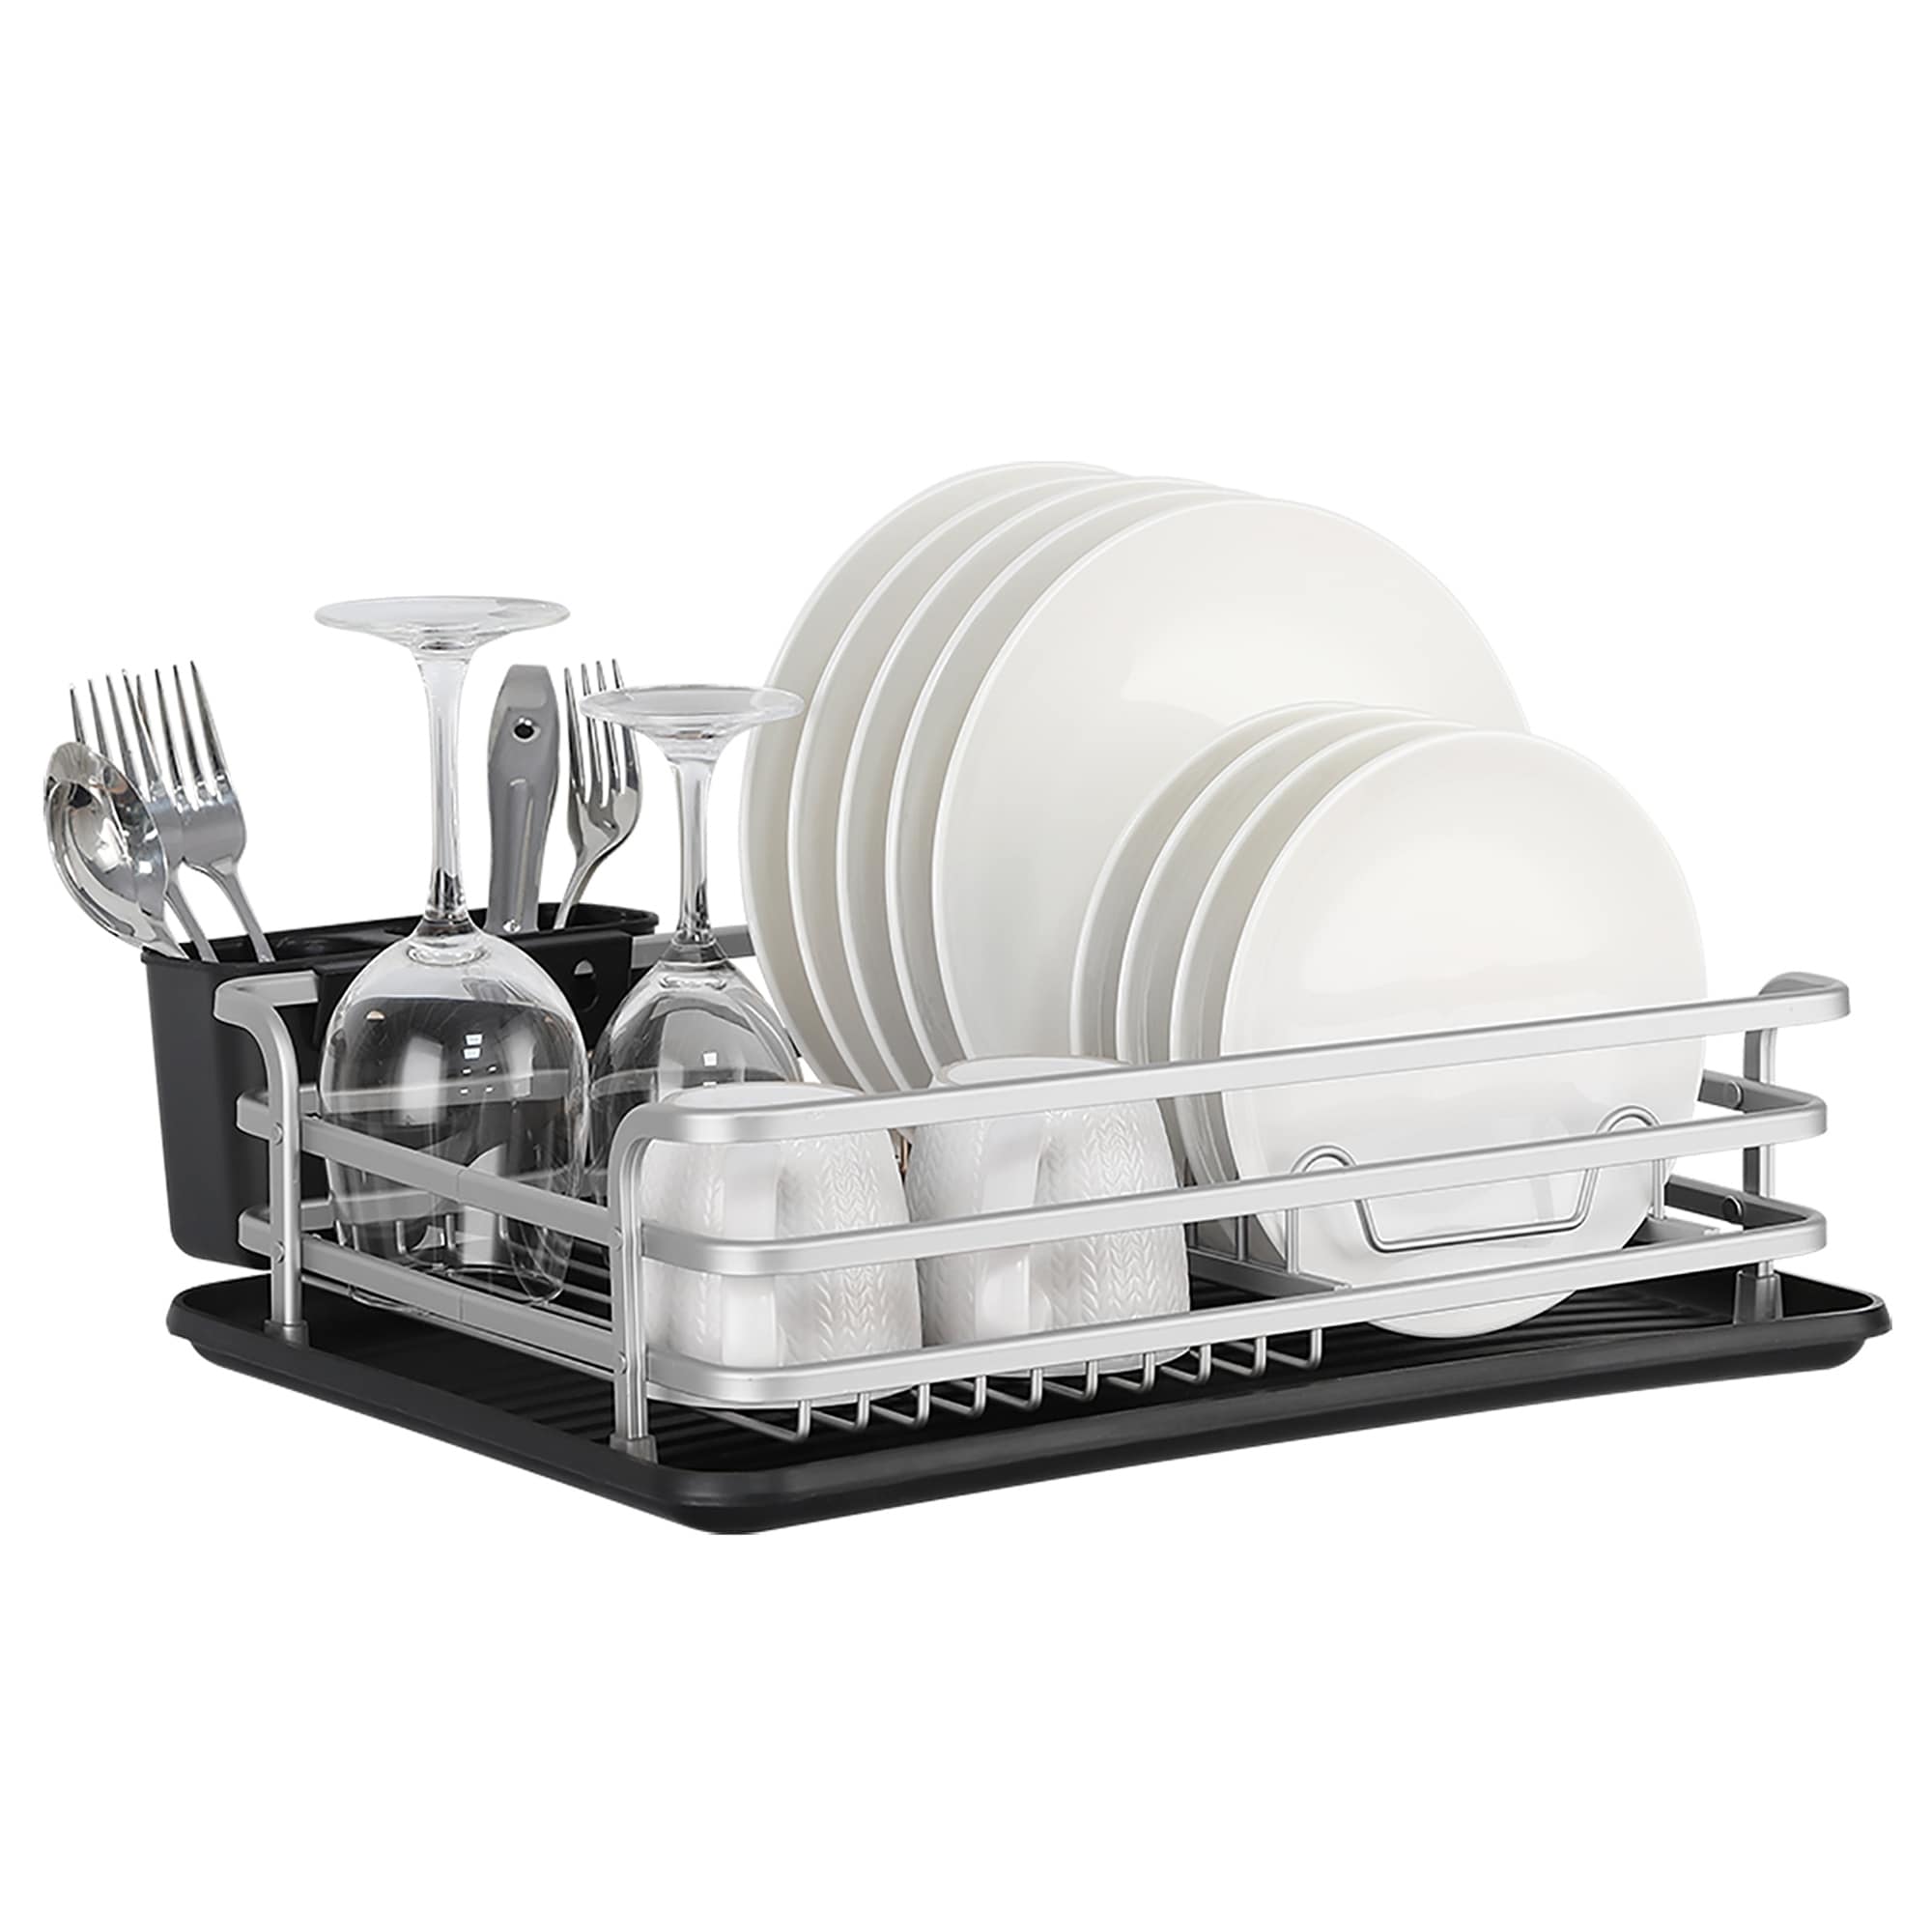 https://ak1.ostkcdn.com/images/products/is/images/direct/f8f715cf05a1daa6b5b42ce507a14296e6045250/Aluminum-Dish-Drying-Rack-with-Cutlery-Holder%2C-Silver.jpg